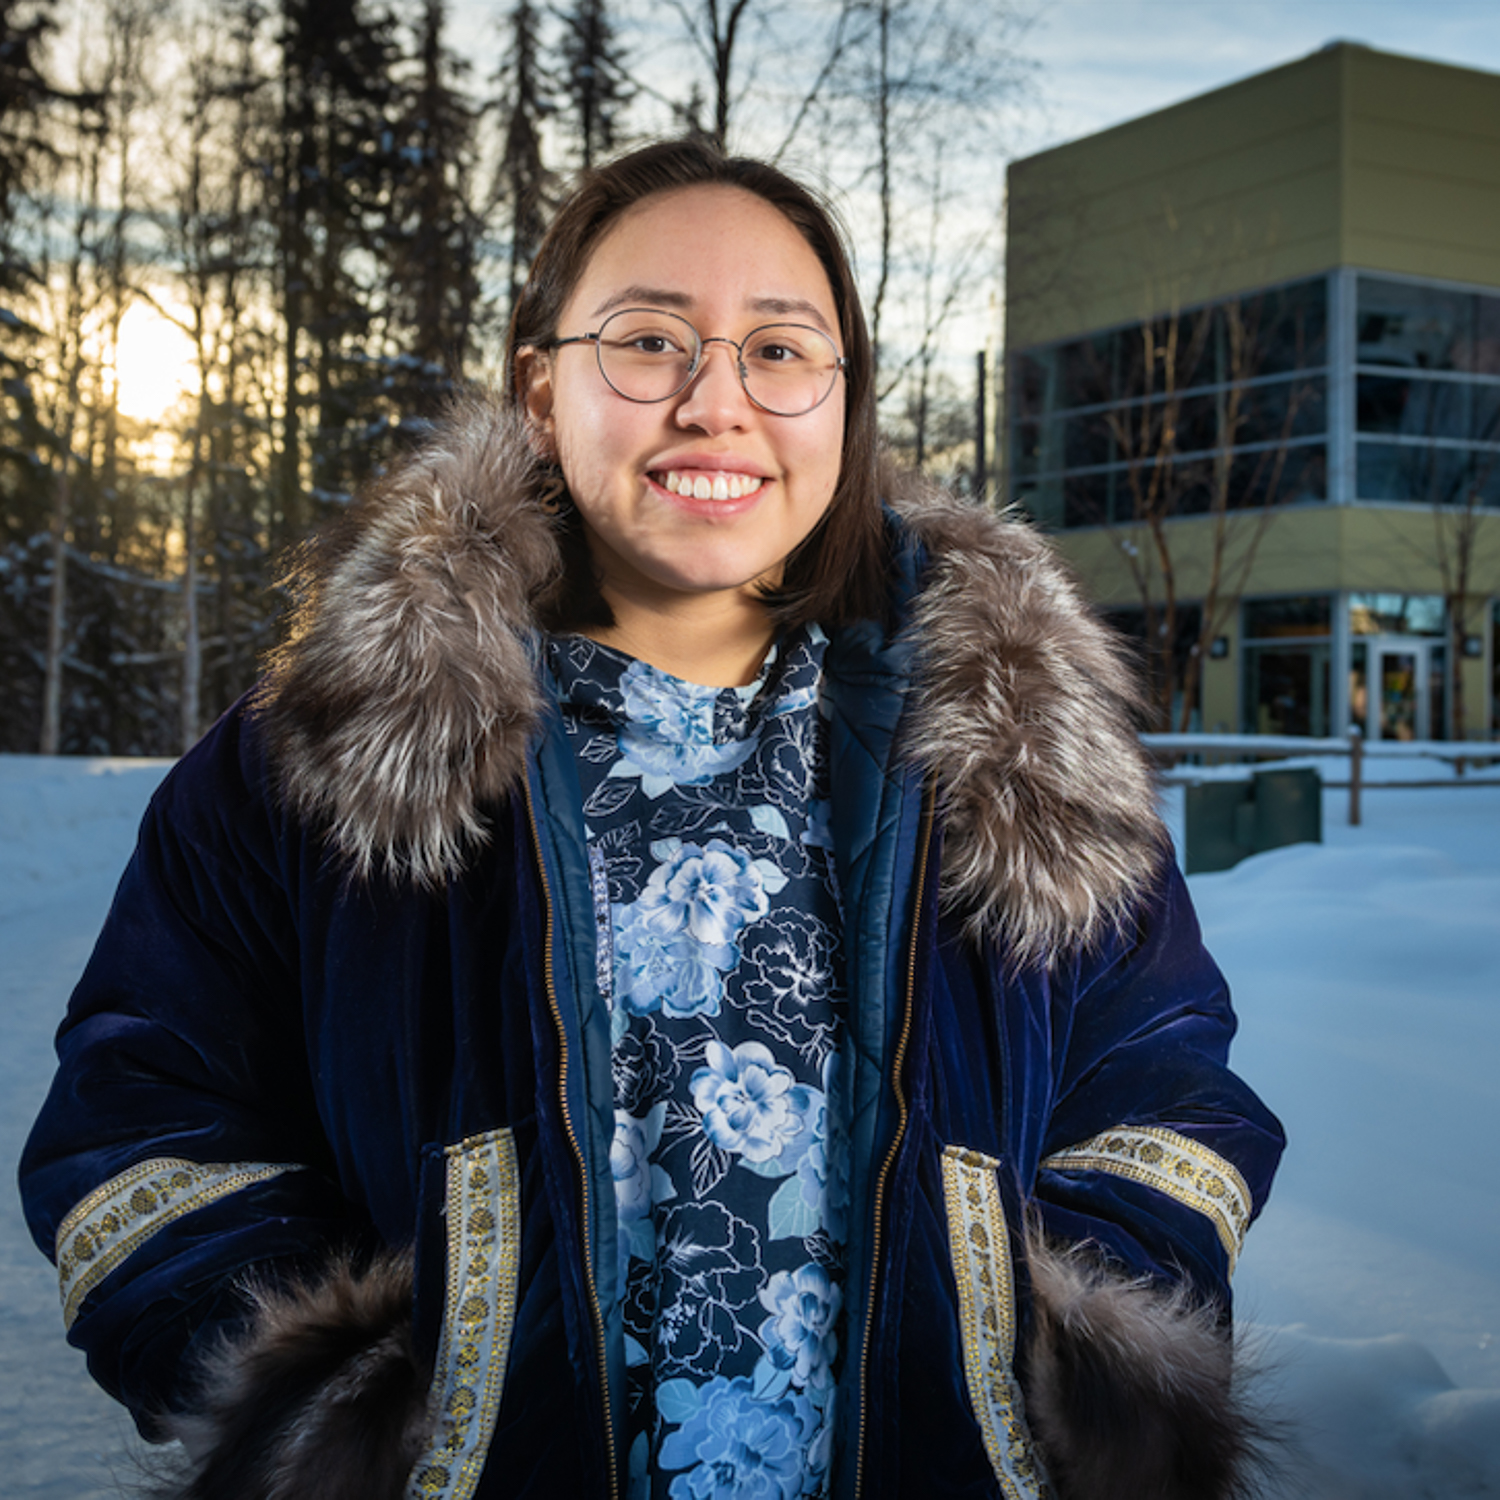 student, Katherine Sakeagak, stands in front of the ANSEP building in winter.